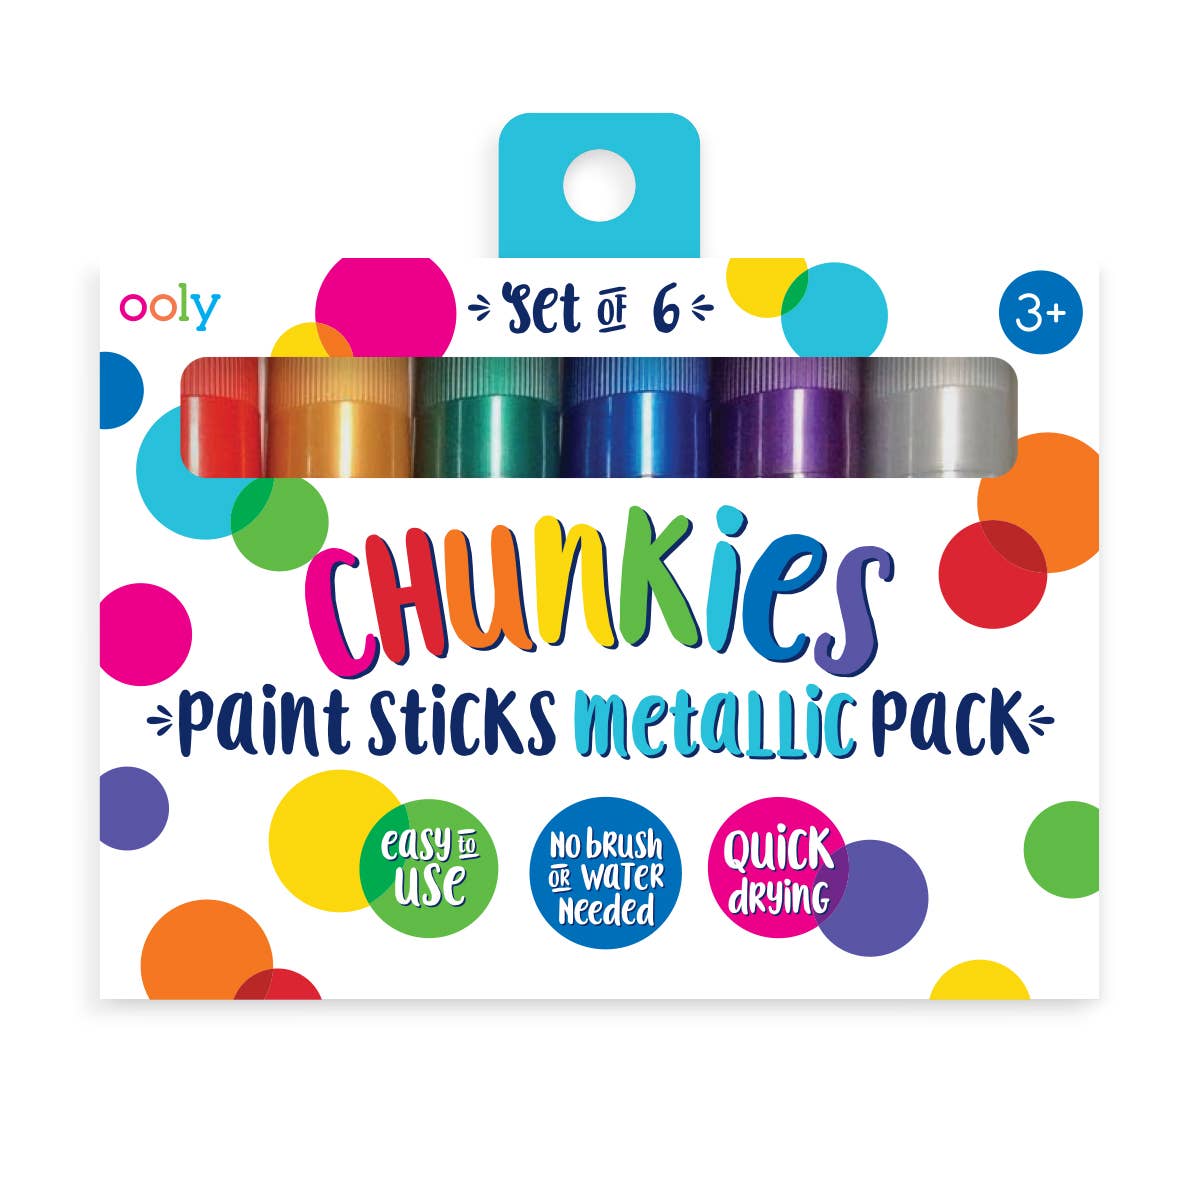 Load image into Gallery viewer, ooly Chunkies Paint Metallic Sticks - Set of 6
